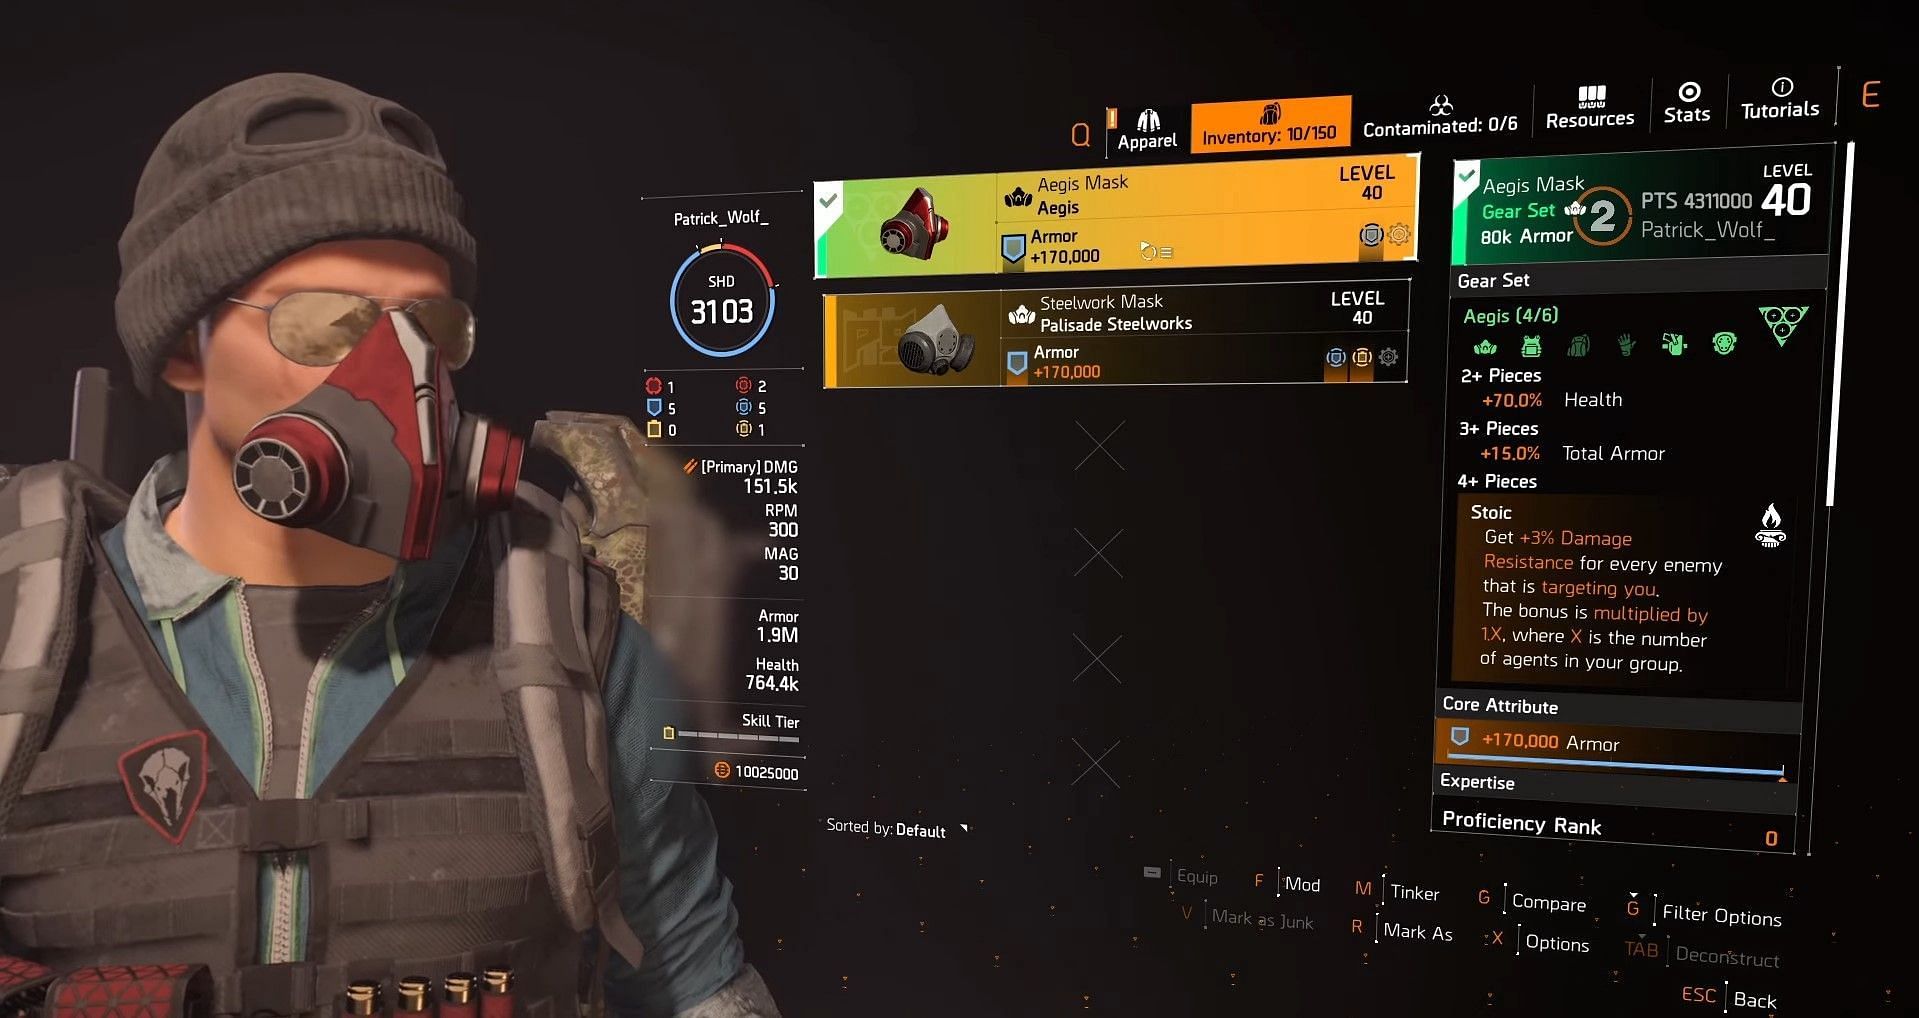 Aegis Mask in The Division 2 (Image via Patrick Wolf)